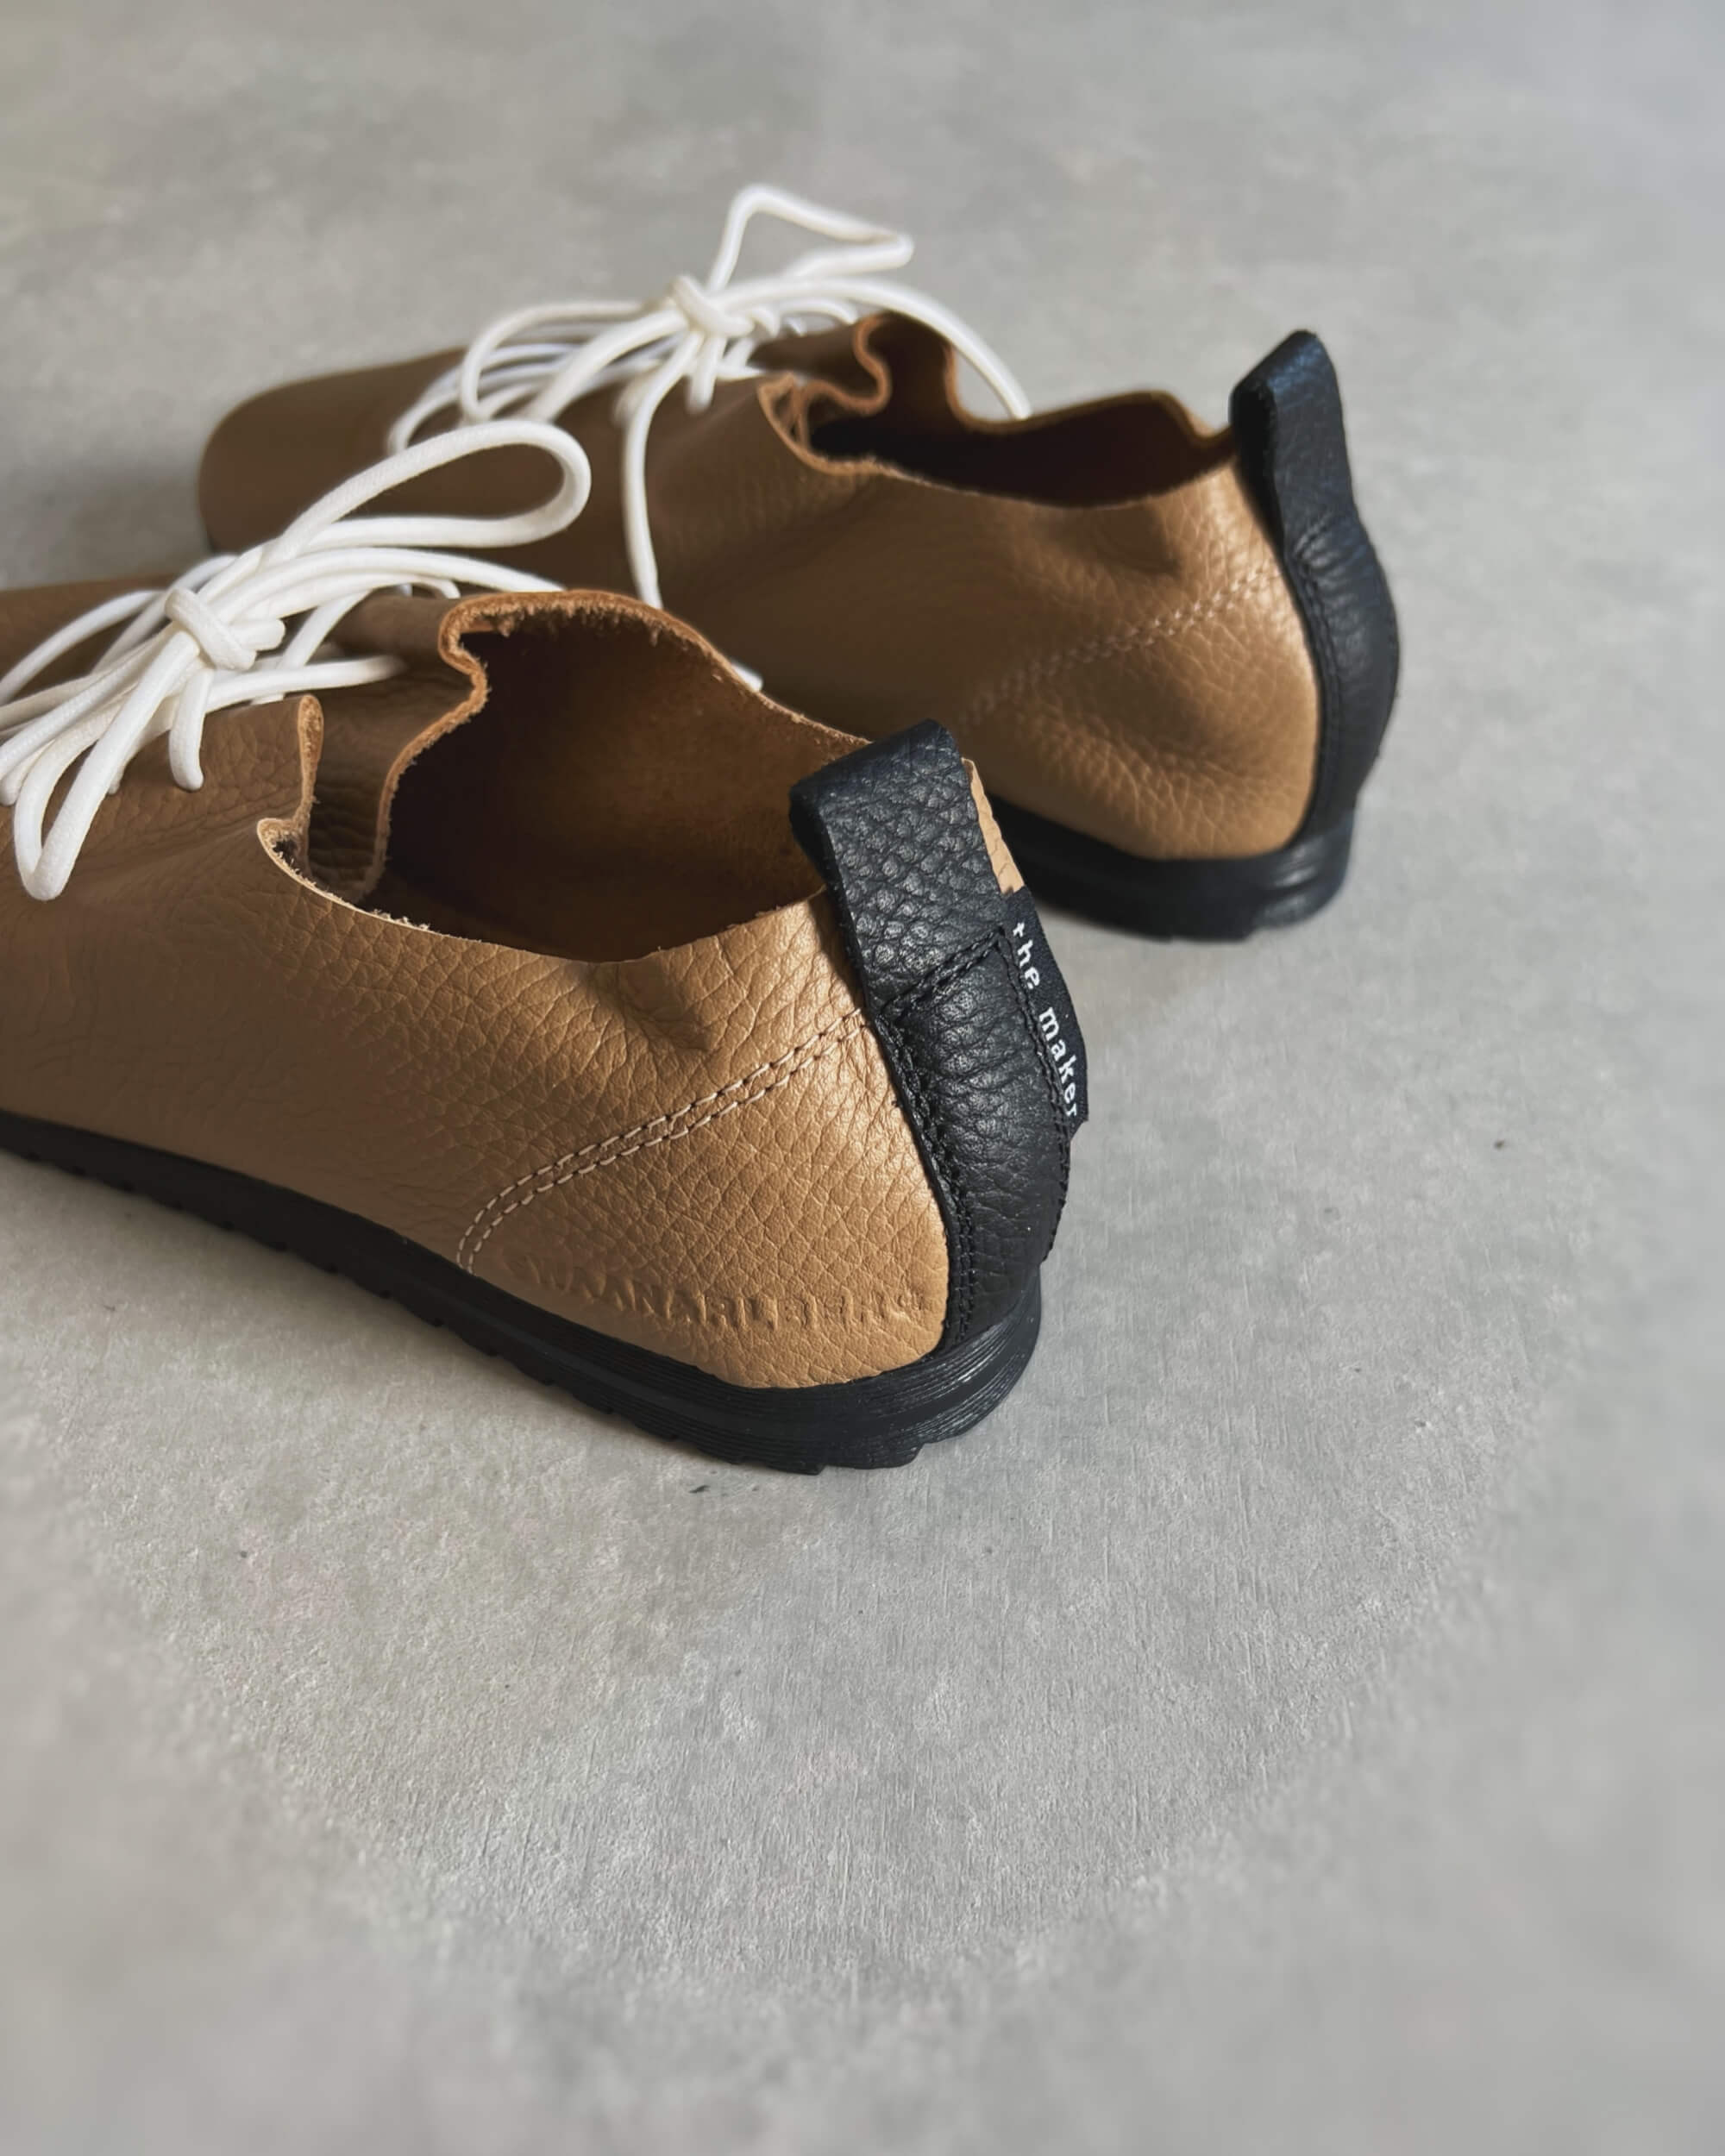 swaanarlberg : japanese leather shoes in cappuccino